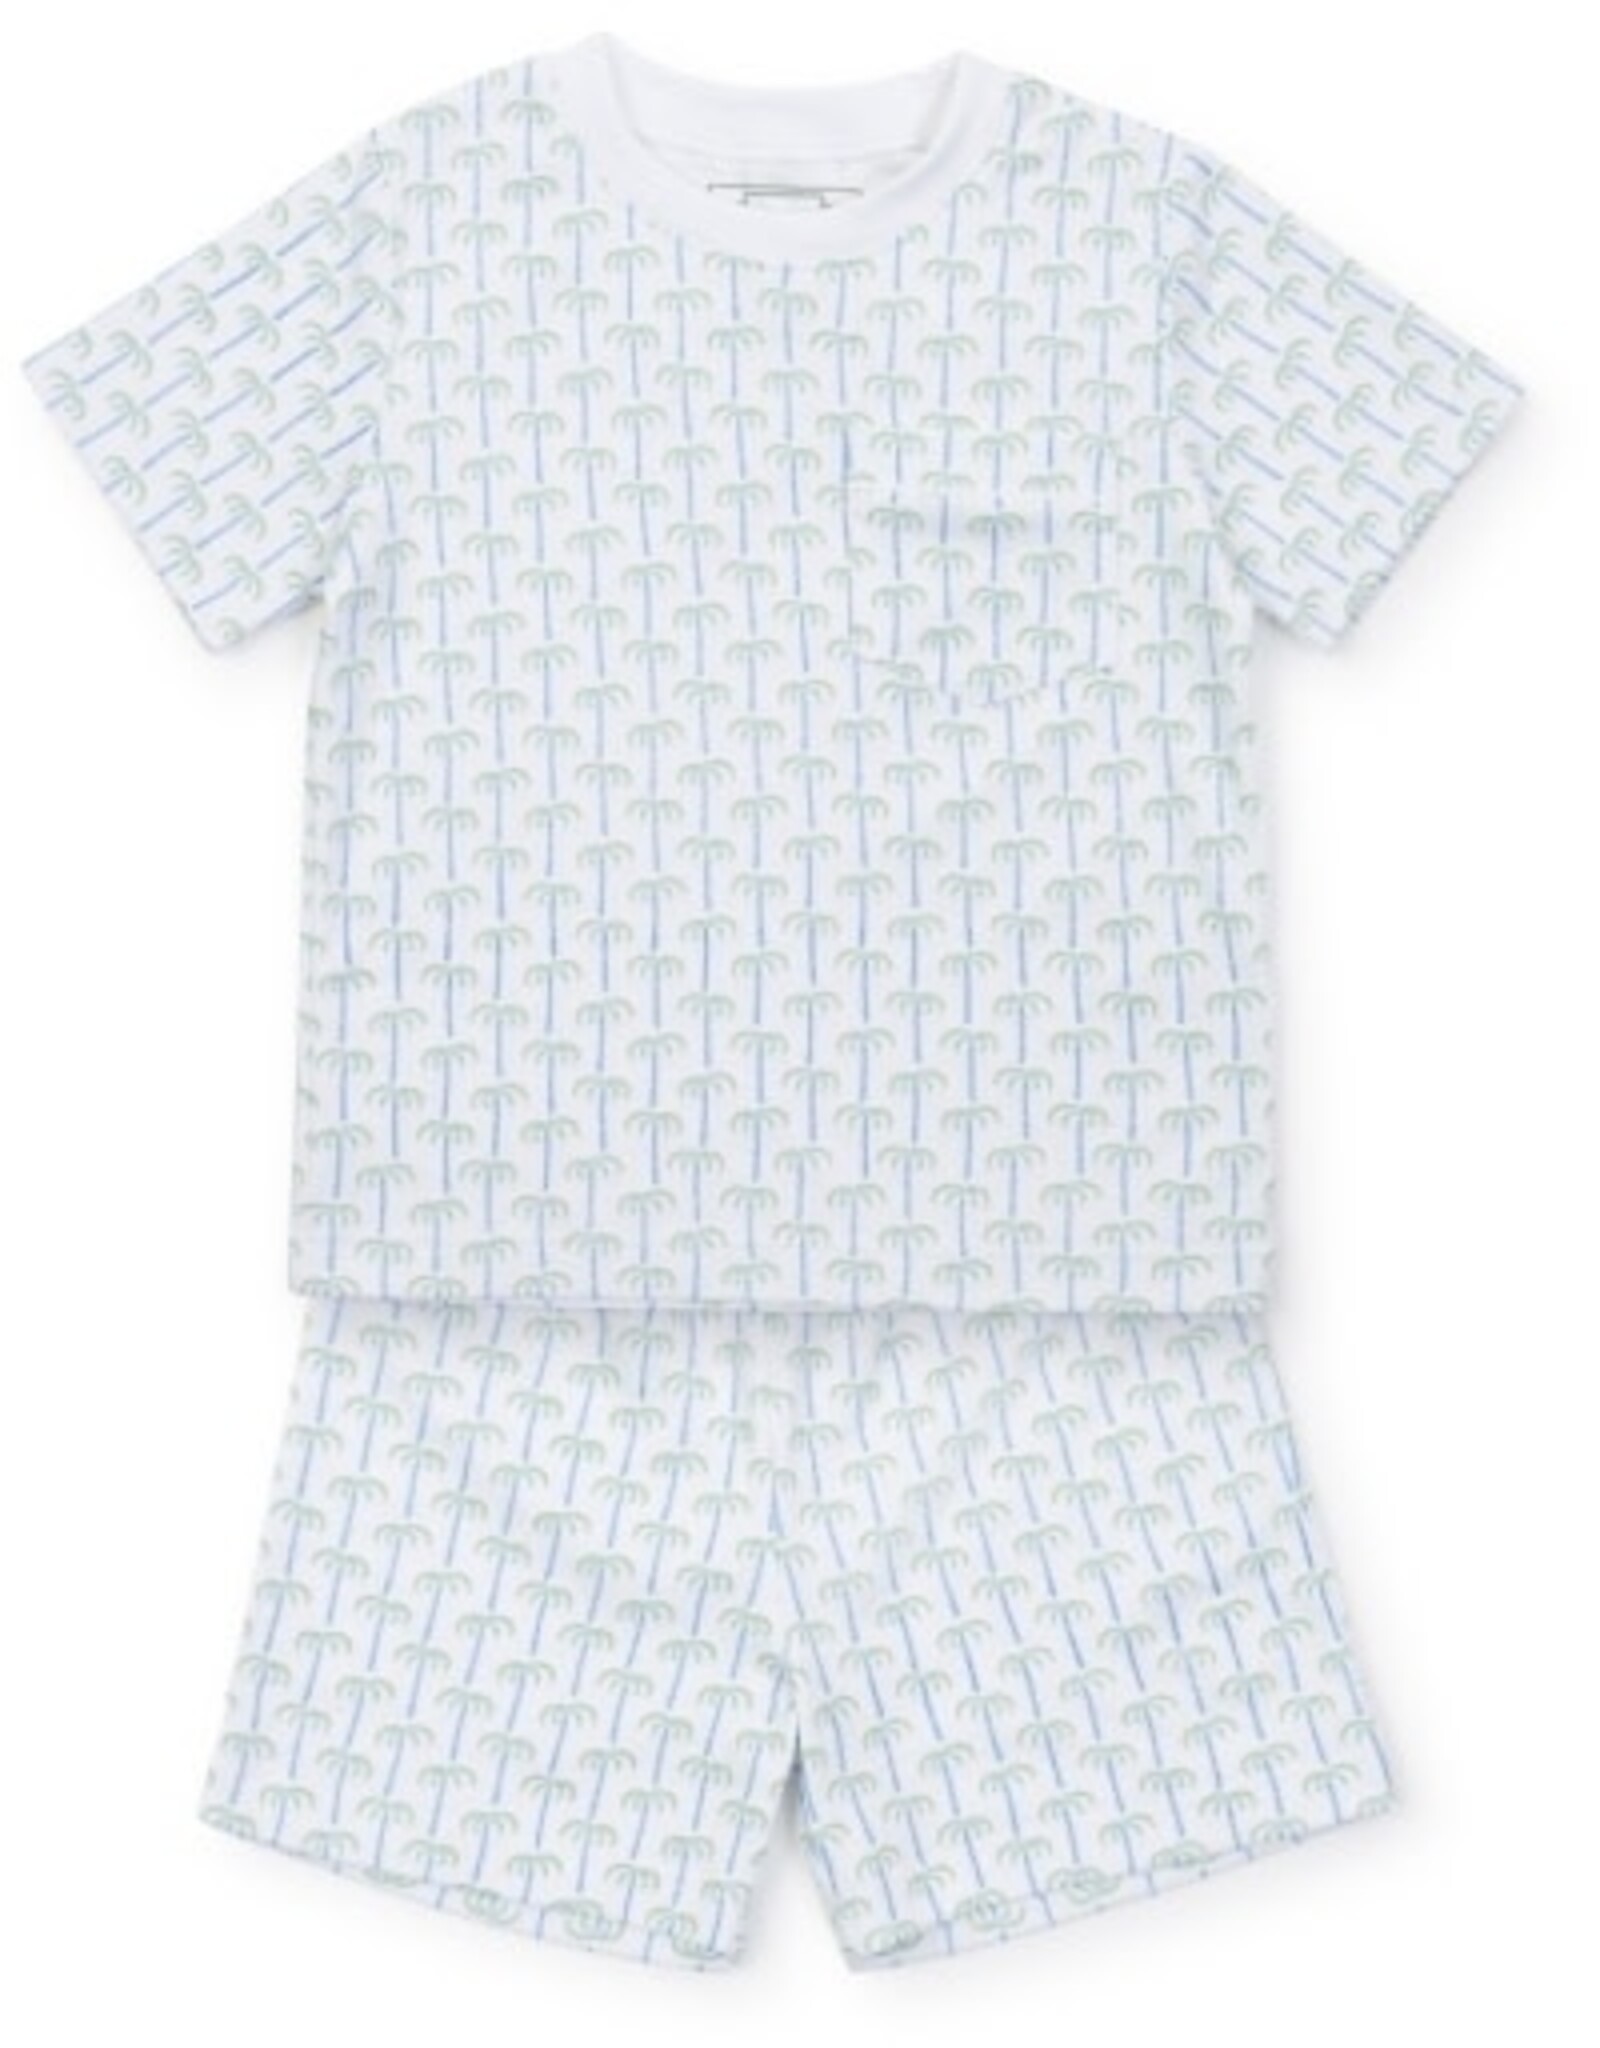 Lila + Hayes Charles Short Set, Pacific Palms Blue